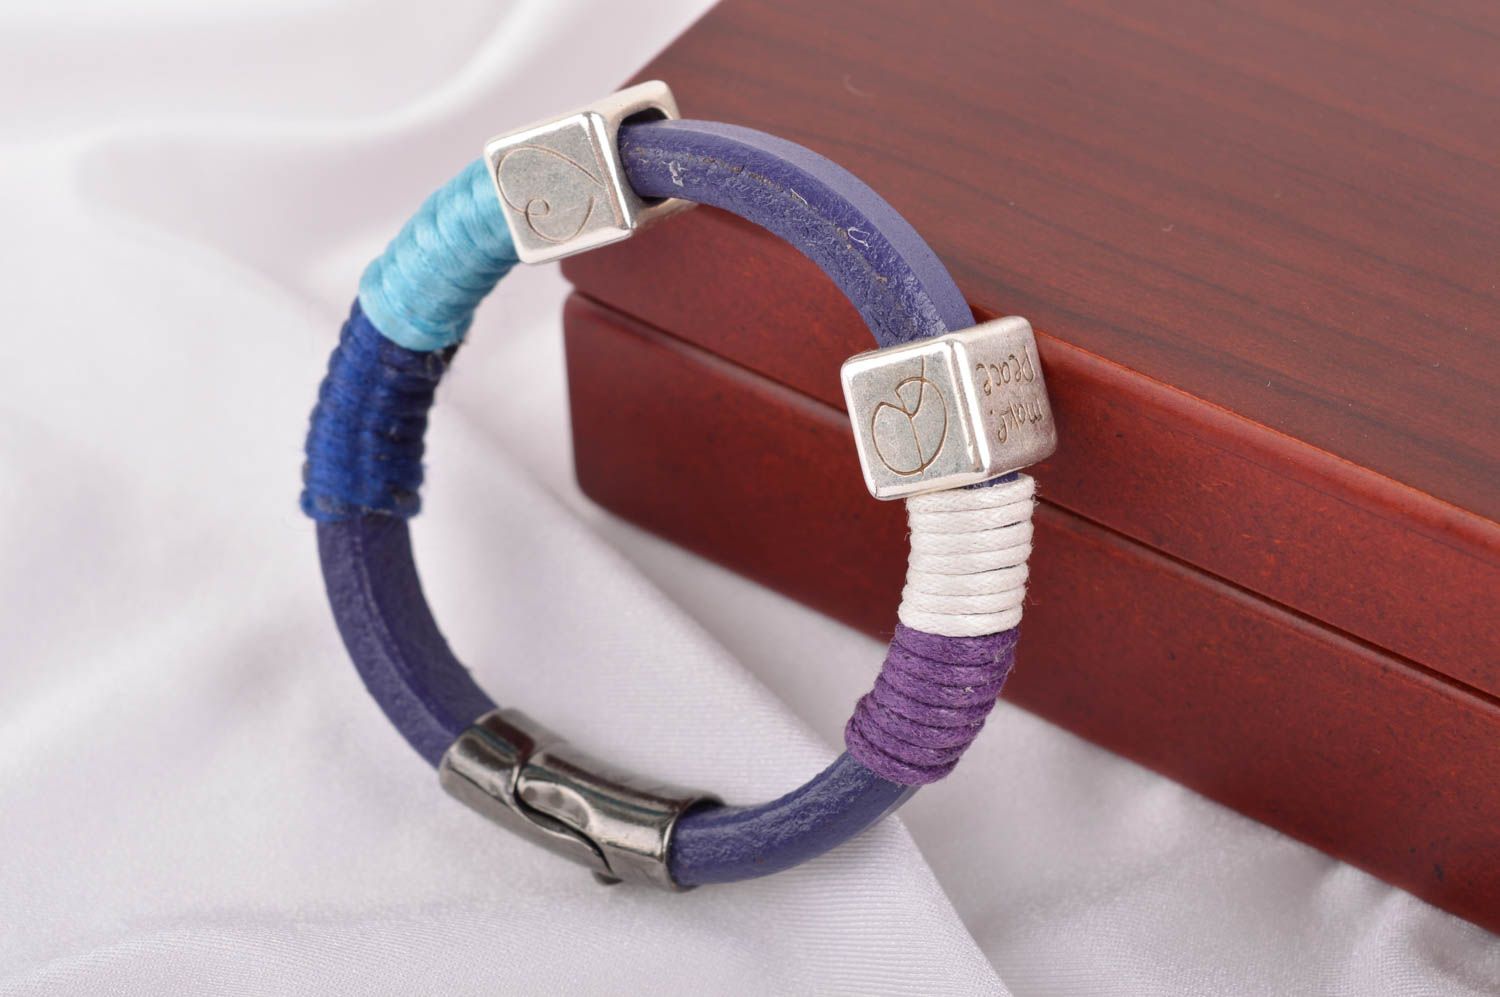 Beautiful handmade leather bracelet with charms fashion trends gifts for her photo 1